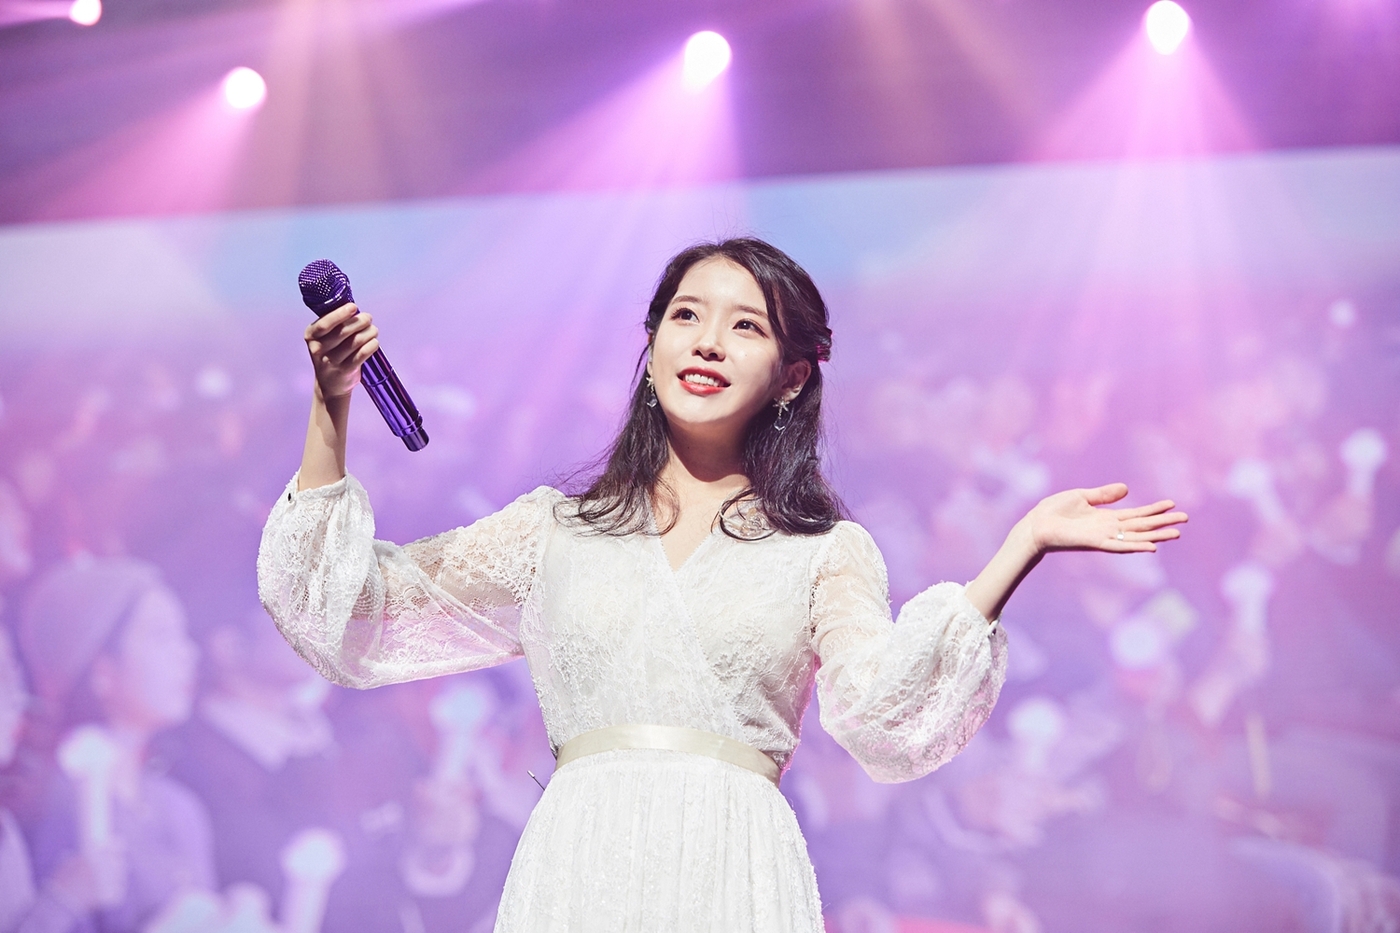 The IU held a tenth anniversary tour concert now - curtain call at the Jeju Island International Convention Center in Seogwipo City last weekend and joined fans of Jeju Island area.The IU added a special feature to the spectacular finale stage of the tenth anniversary tour concert, which was held for three months in four cities across the country and four Asian countries in Jeju Island.In this performance, which recorded full-scale sales thanks to interest, IU expressed its gratitude to the fans who supported 10 years of time like the Curton Call Iran subtitle, and made a meaningful tenth anniversary finish and drew a hot response.The IUs Jeju Island performance, which was an extension of the tenth anniversary tour This Now, was held for three hours and made the audiences heart beat by various representative songs that would confirm the footsteps of the IUs last decade.The Double Walk the Line (Encore), which was considered to be the backbone of each performance in line with the meaning of Curtain Call Iran, was unfortunately omitted, but the special stages of the IU, which can only be seen in Jeju Island, were revealed and impressed.As it is a Jeju Island performance, IU, which appeared as a bright terior color costume on this day, led to a loud shout of the audience with a bright greeting that I finally came to Jeju Island.Jeju Island is a place where I have a lot of good memories, said IU, who expressed his extraordinary memories. I will make a good decision in Jeju Island and give a warmer heat to the scene.On this day, IU breathed closer to the audience based on the sympathy and sympathy of the hit song medley including the 10 years of Pink Shin, Good Day, Meet on Friday, Pippi and debut song Mia.Especially, the cover stage of Jeju Islands Blue Night, which was introduced with the meaning of Curton Call performance, was more loud than any stage.A special guest also stepped up for the IU who visited Jeju Island for a long time.Singer Lee Hyori and Lee Sang-soon, who have been linked to Hyoris Guest House, came to the stage as surprise guests.The IU, which welcomed the two people by calling the president and the president, hugged them affectionately and showed a special friendship.Lee Hyori and Lee Sang-soon, who conveyed the playful nuisance that Ji Eun was forced to run because of the request, conveyed their heartfelt support with special affection for the IU.In particular, on this day, the stage of the song She, written by Lee Hyori IU, which was released as Hyoris Guest House and collected topics, was first released and applauded for a special time through music.In the fourth part of the performance, which was specially organized only in the Jeju Island performance, IU wrote and composed songs such as Palette, Knee, Mind, Night Letter, and Name.IU, who conveyed the truthful heart of 26 Lee Ji-eun through the songs of Ji-eun directly, gave a deep echo when it first released its unreleased self-titled song Station, which was completed at the time of filming the drama My Uncle.At the end of the tenth anniversary tour, IU said, It was really good to be able to finish the tenth anniversary tour concert - this now in Jeju Island.I will be remembered for my proud performance. I think I have been living in the name of IU for 10 years.I thank all those who have made me feel like you and me are one. After all the performances were over, the audience applauded the stage, which was over, and thanked the IU for completing the best performance.As a response, IU came back to the stage again and sang the Walk the Line song You and I and gave a message of gratitude to the fans who had been together for 10 years through the outtro video, which led to the long afterlife of the tenth anniversary tour concert.On the other hand, IU, who has completed the tenth anniversary tour safely, will appear on JTBCs special project Your Song, which will be the first music show on Thursday night, and will visit fans through music broadcasts for a long time.